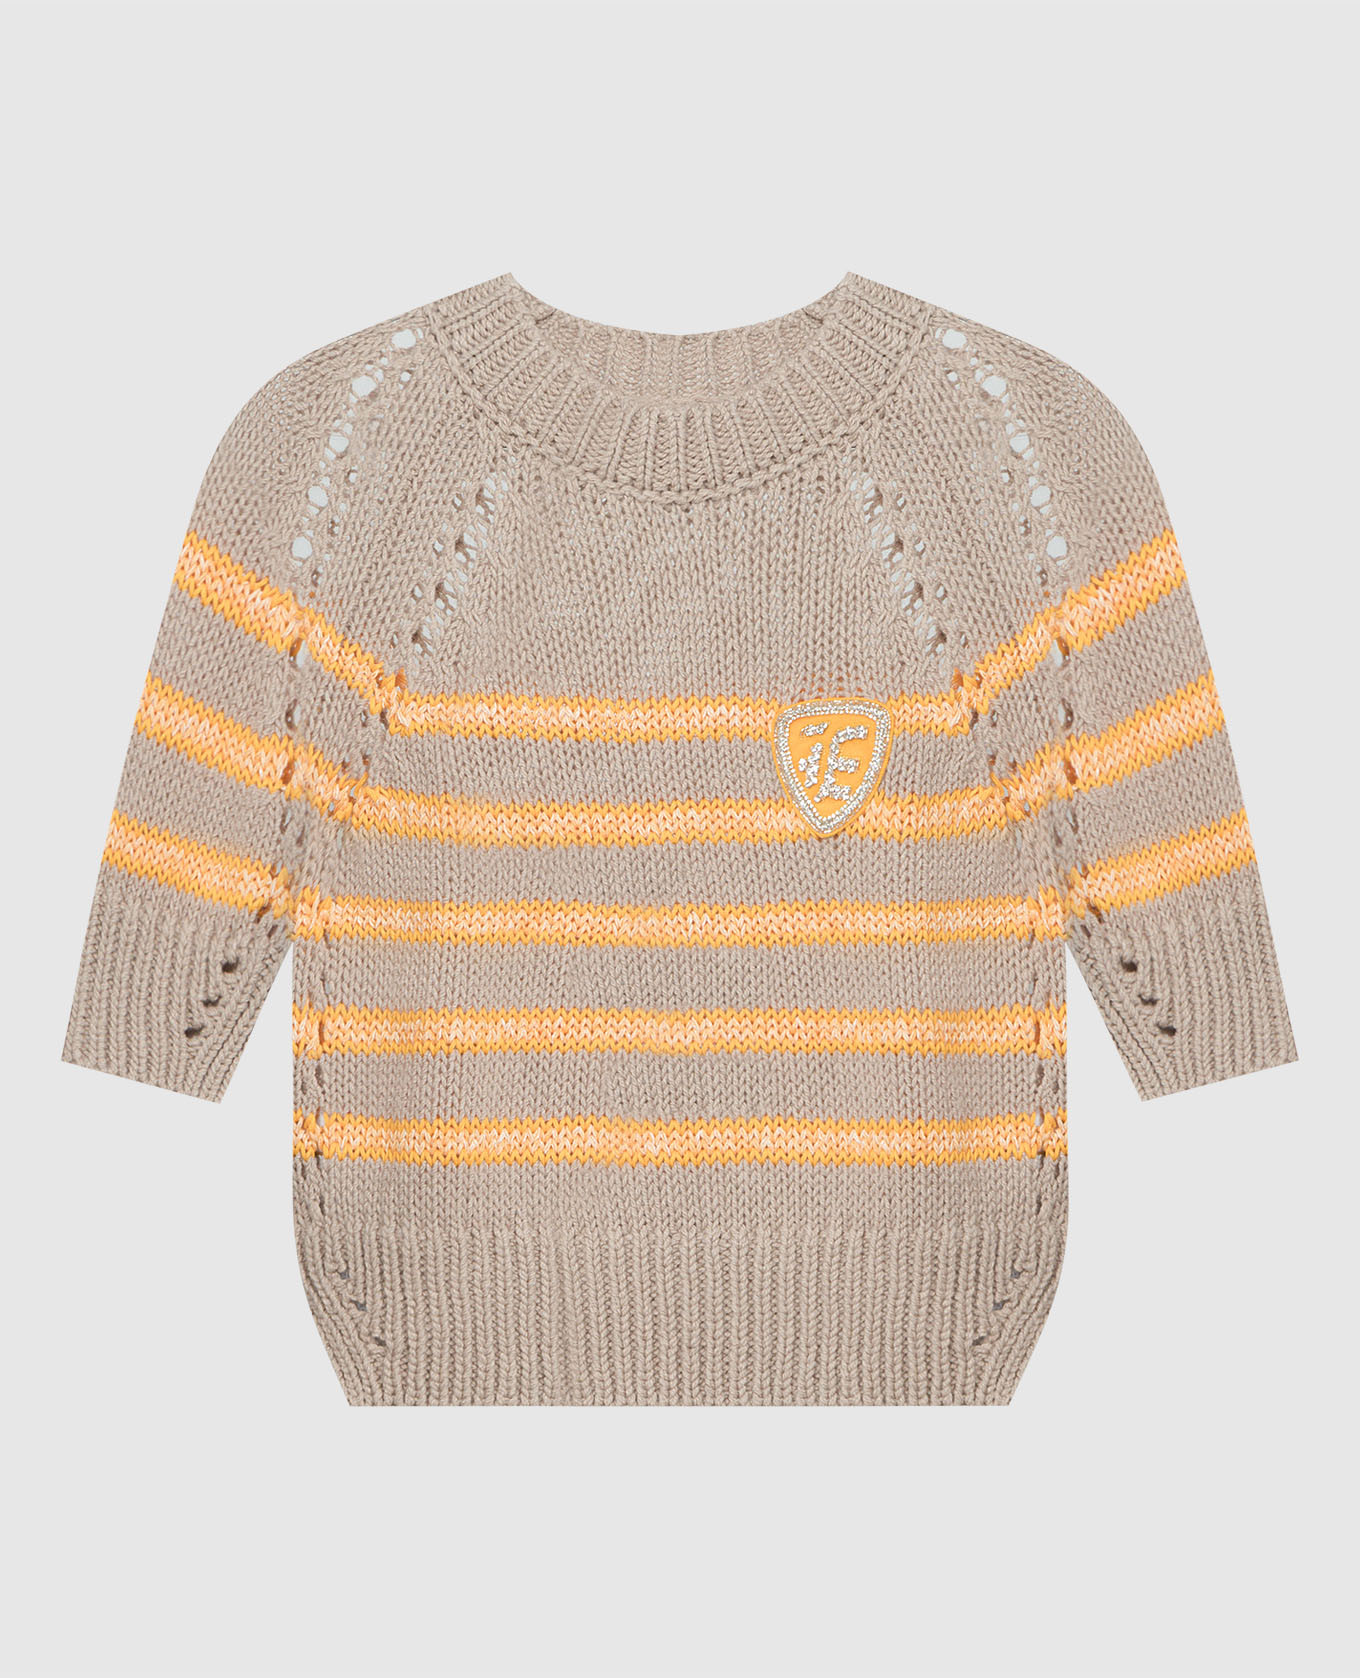 Brown striped jumper with logo